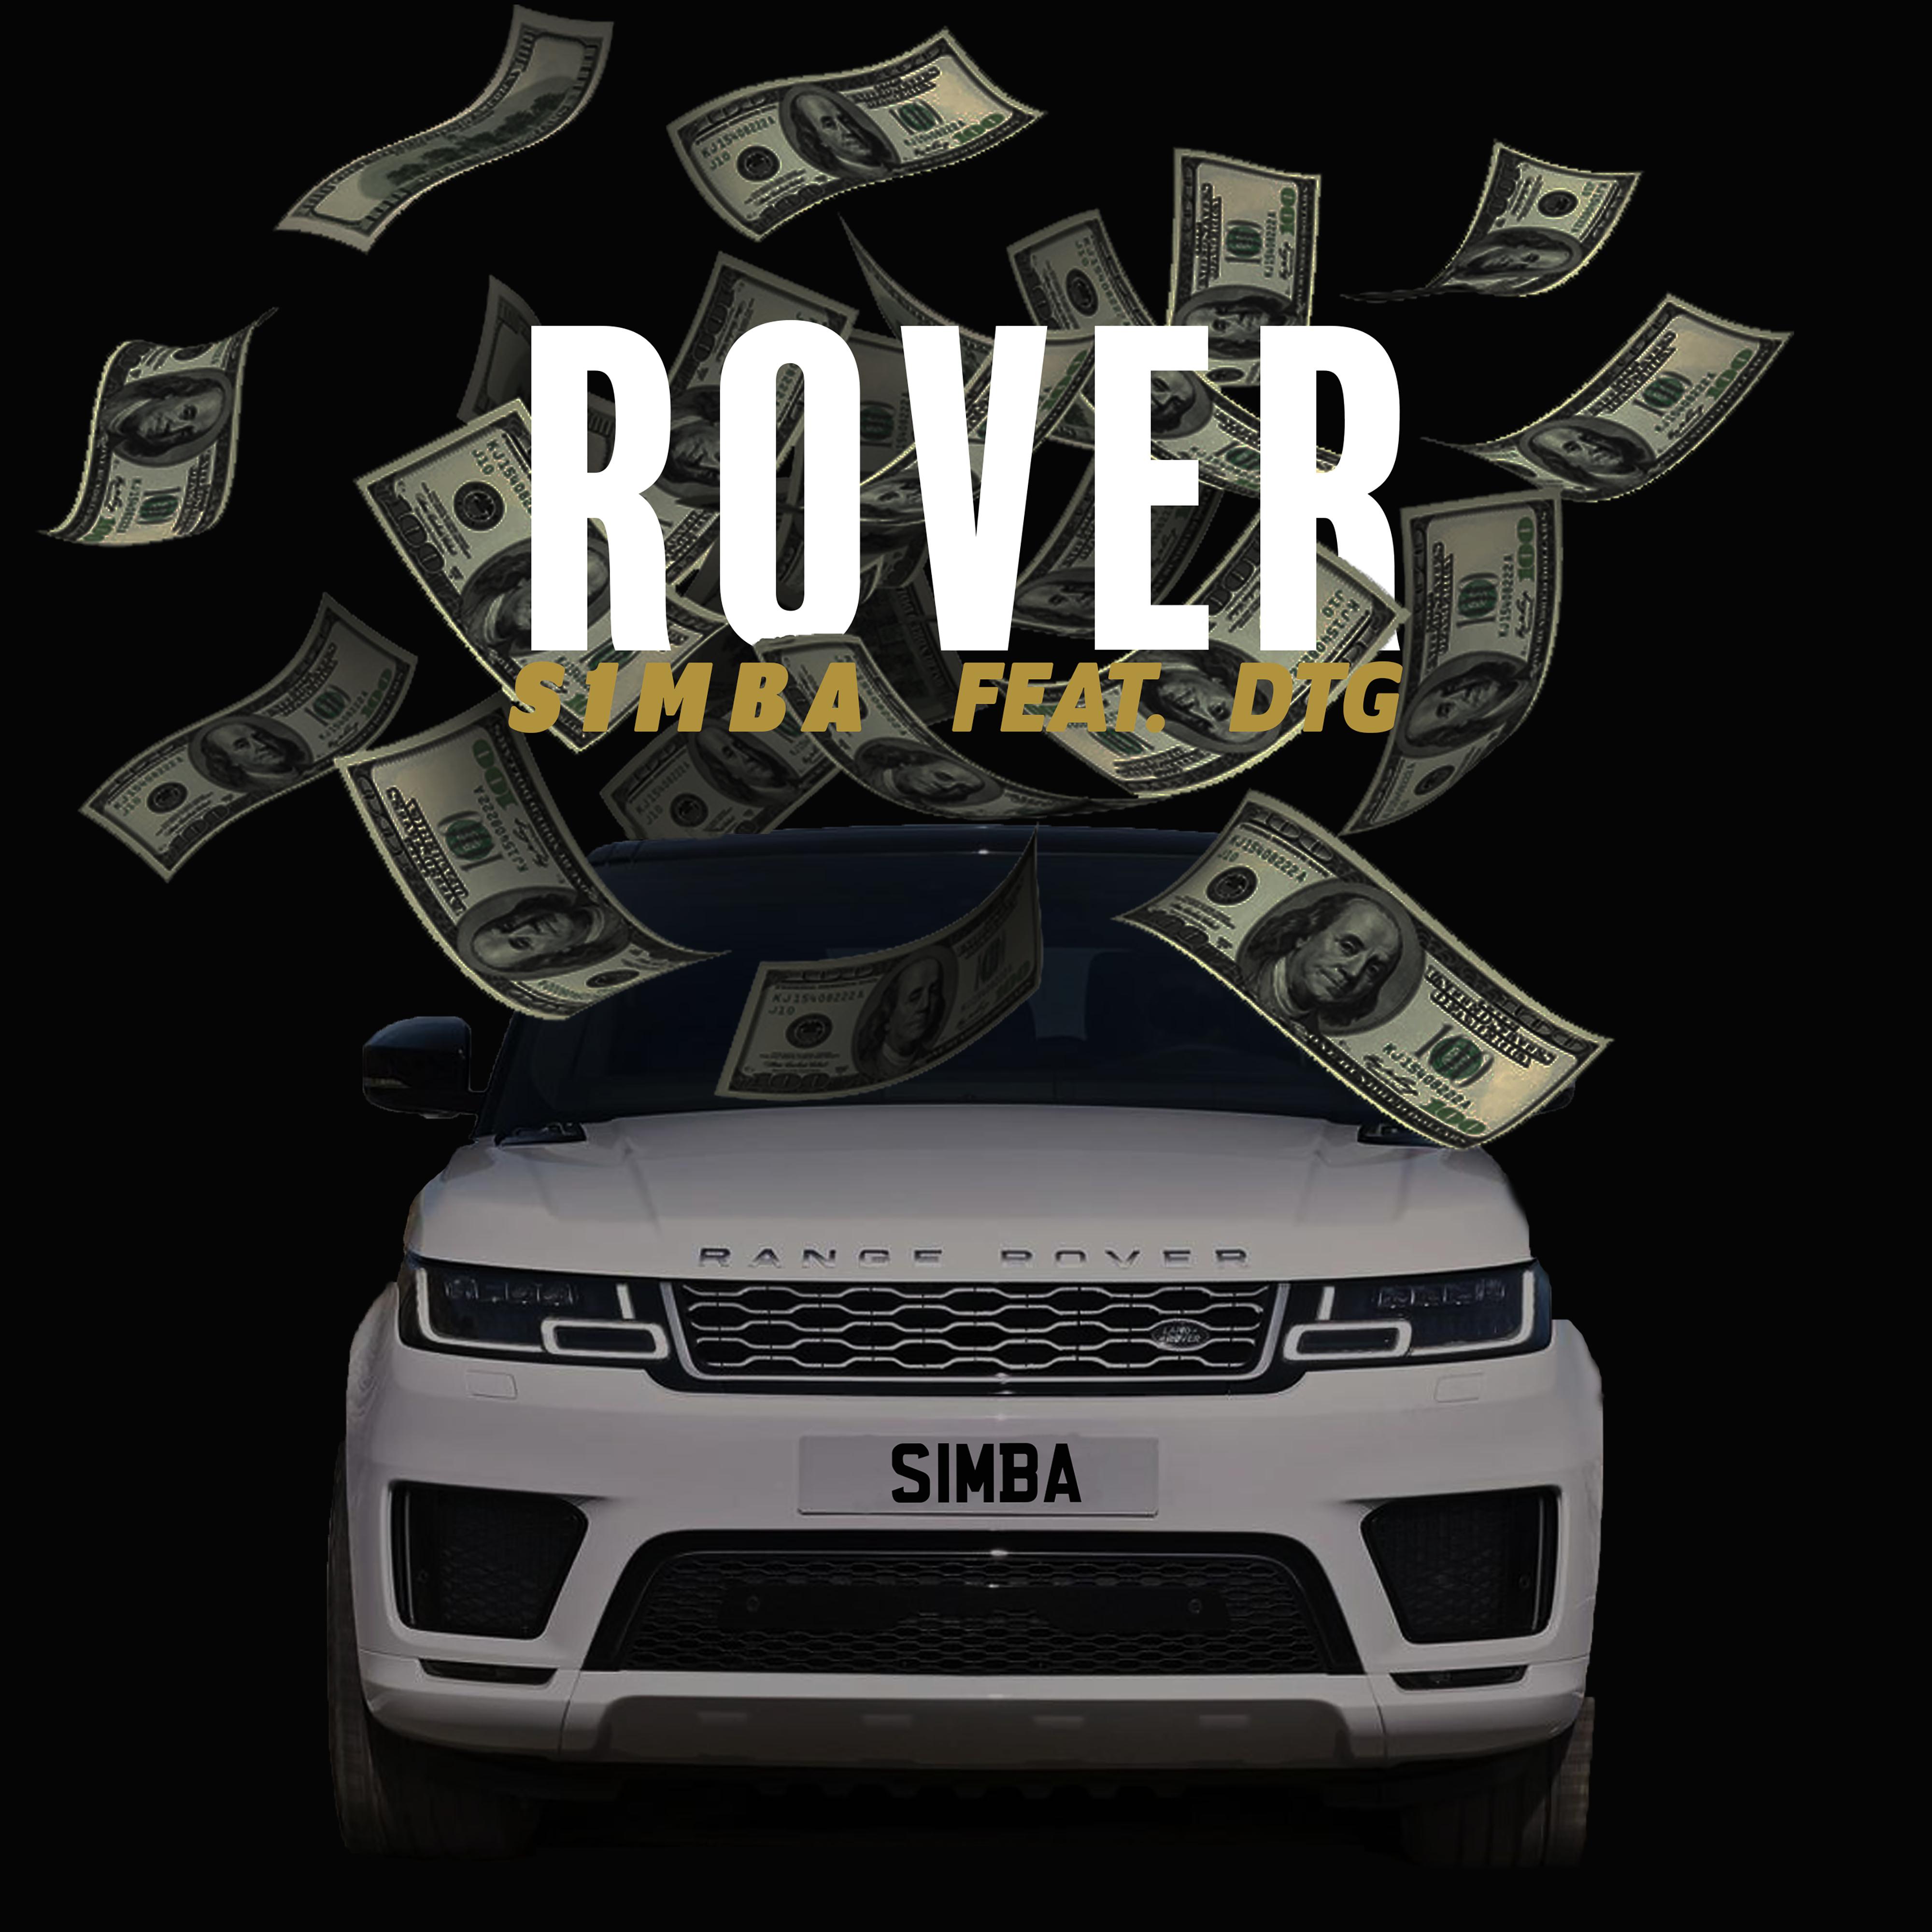 Rover (feat. DTG)专辑